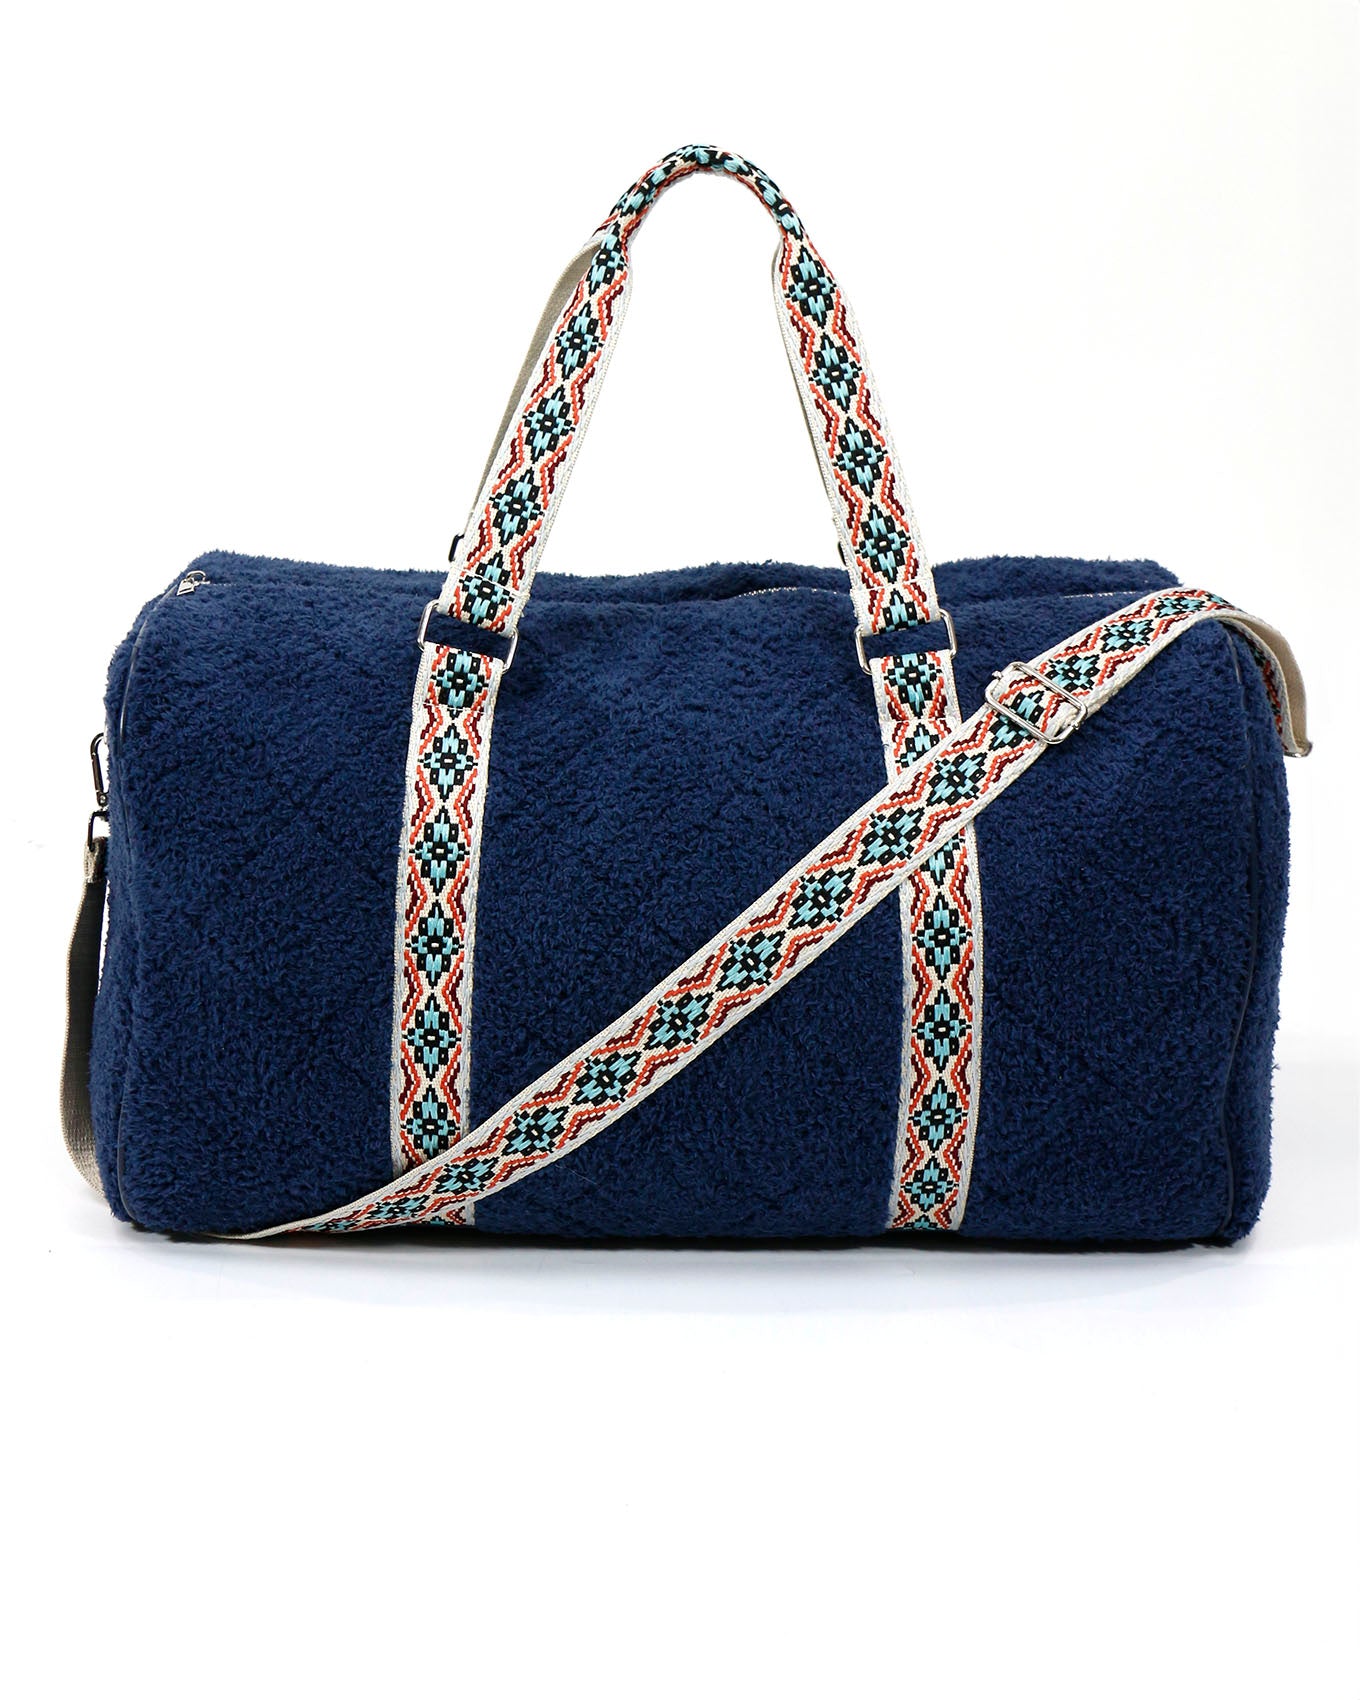 Full side view of Navy Multi Quilted Cloud Duffle Bag